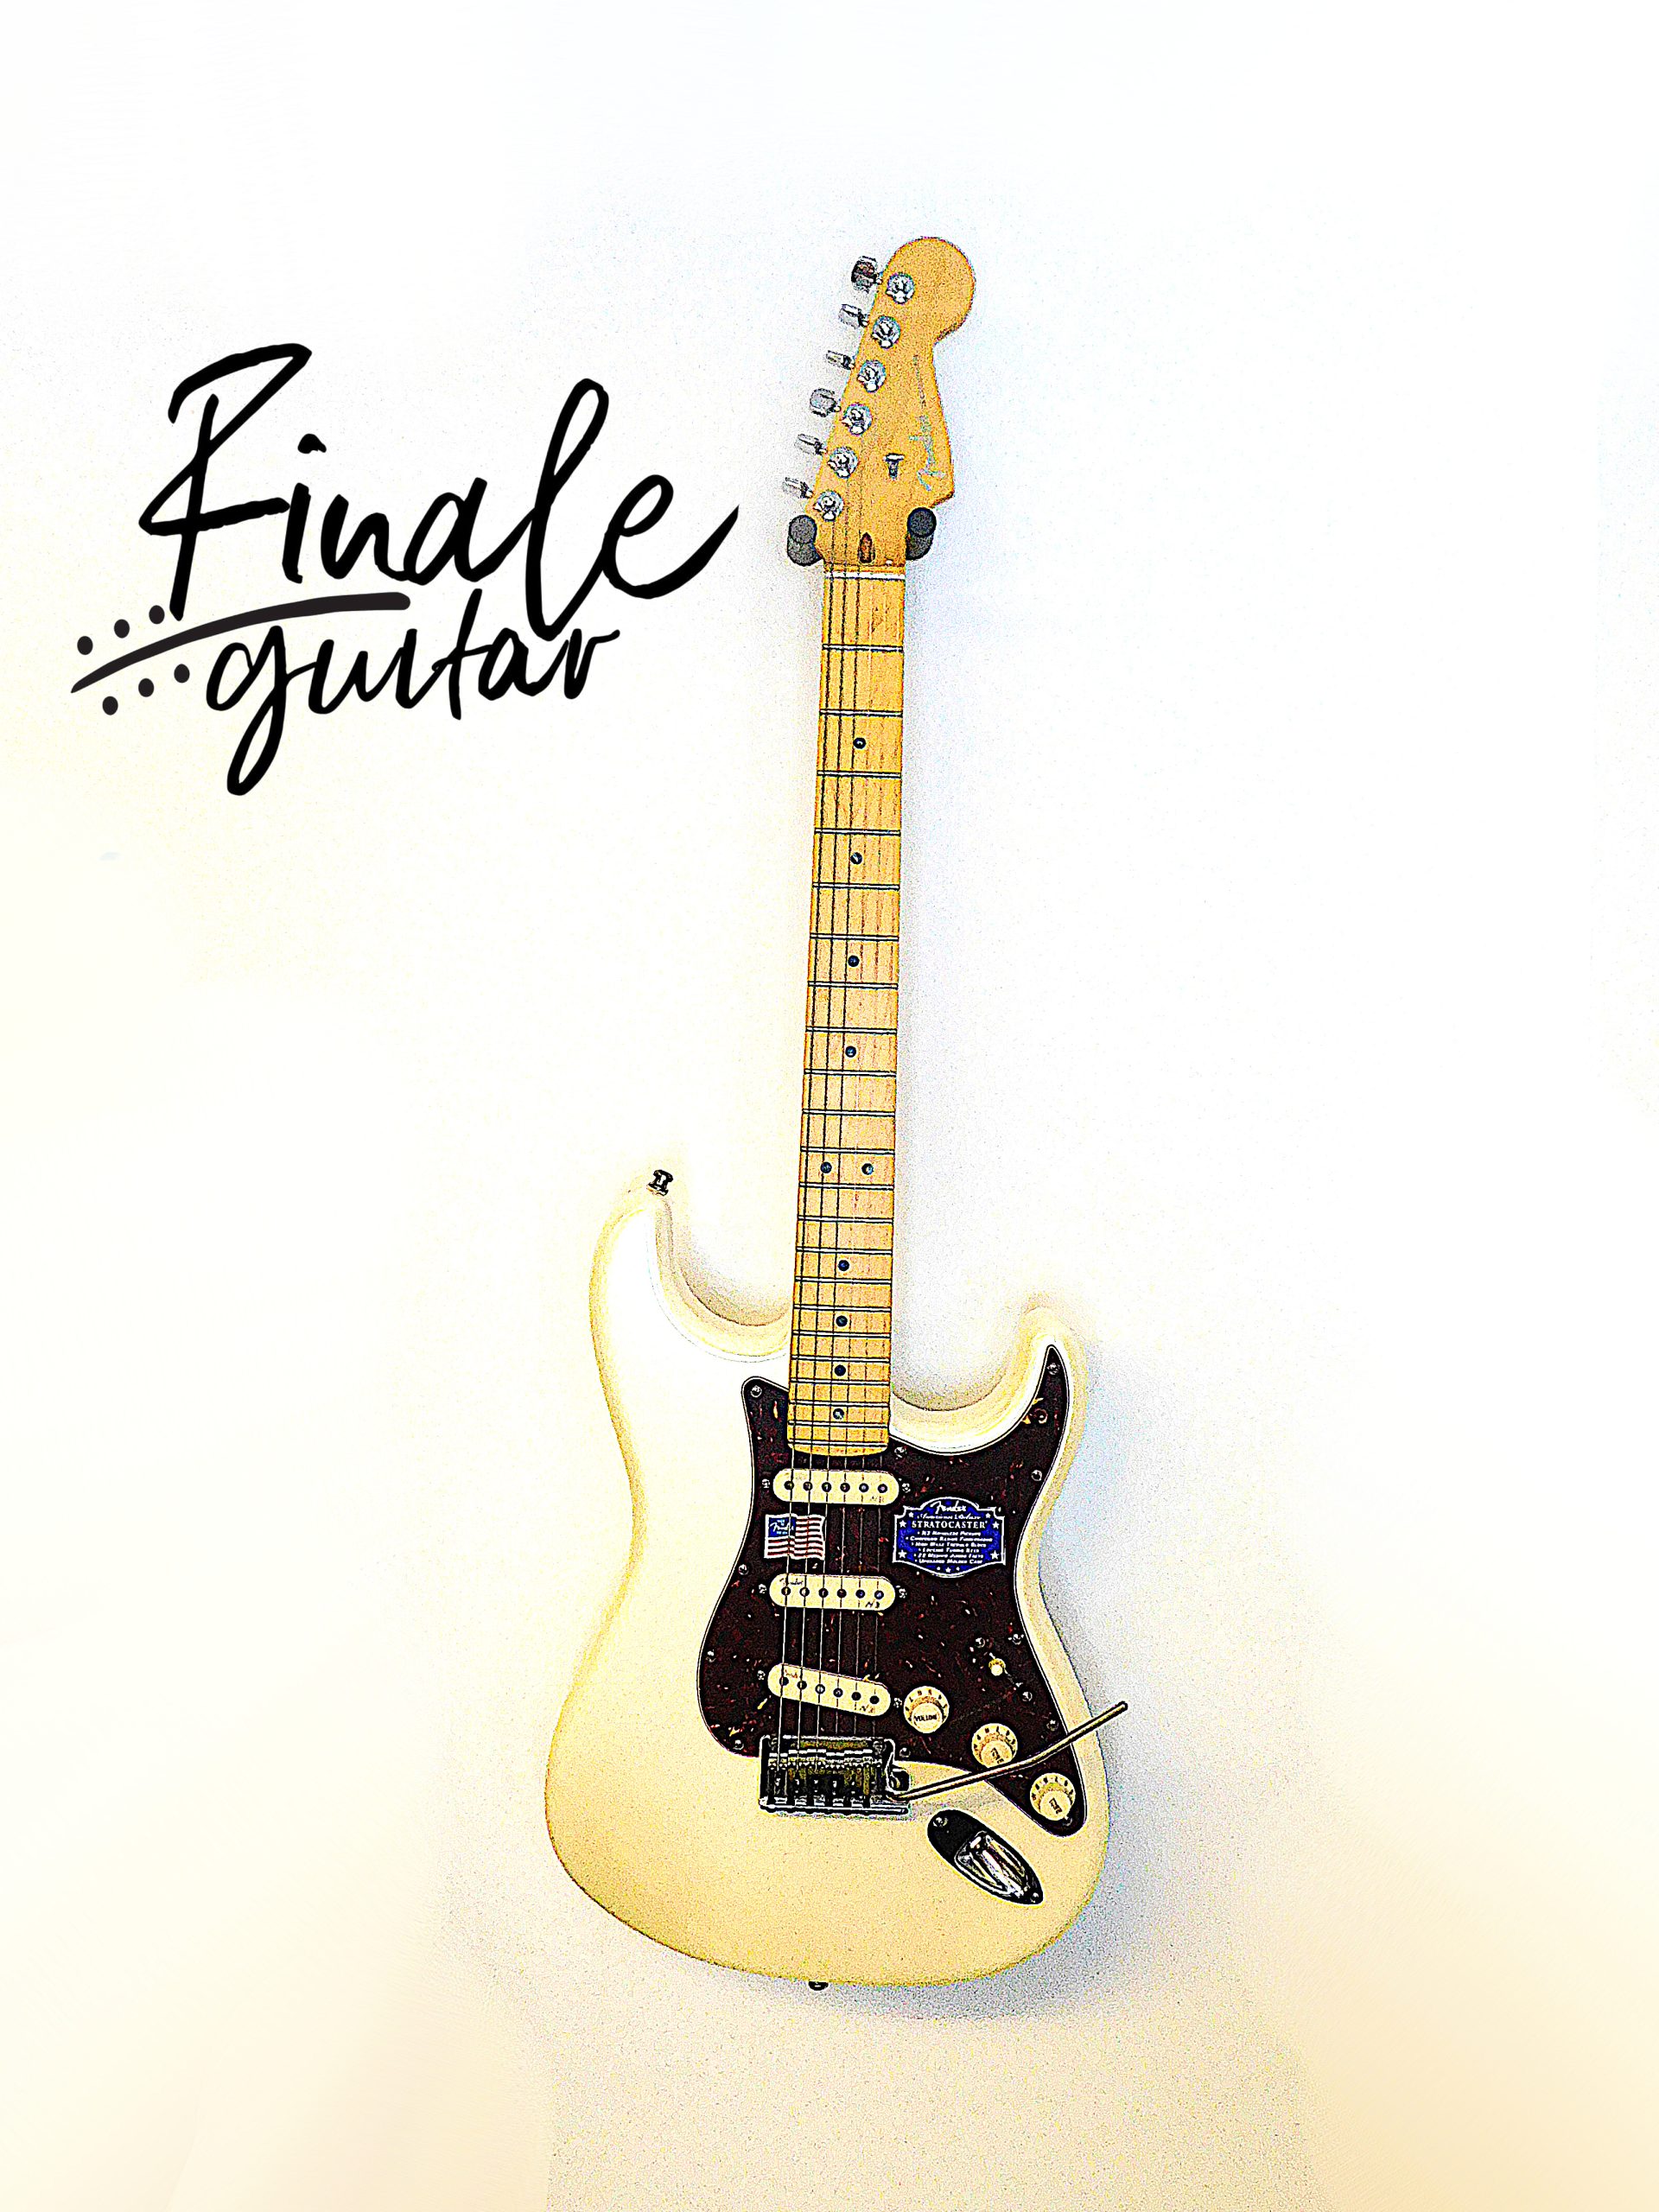 Fender American Deluxe Stratocaster (2014) with Fender hard case for sale in our Sheffield guitar shop, Finale Guitar